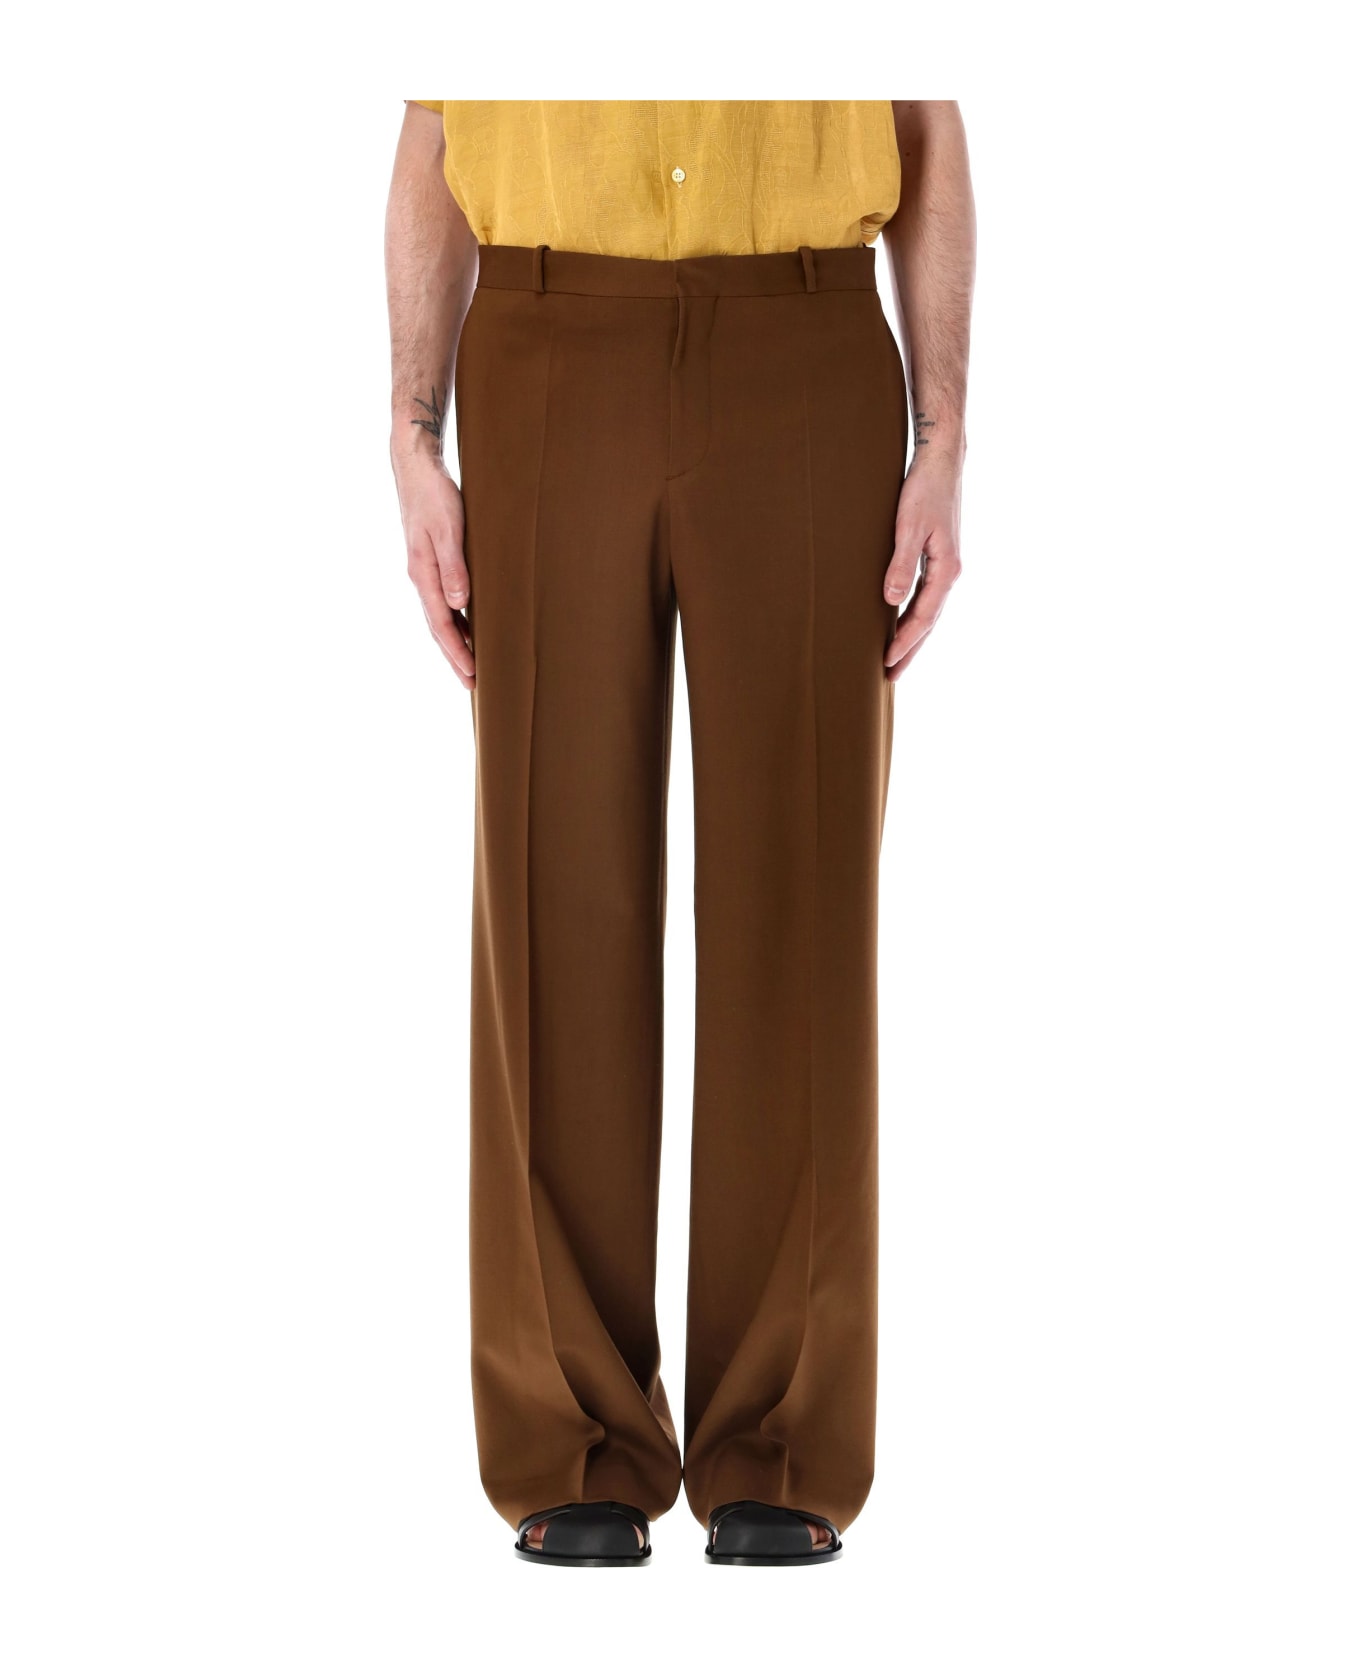 CMMN SWDN Otto Wide-leg Trousers - BROWN ボトムス